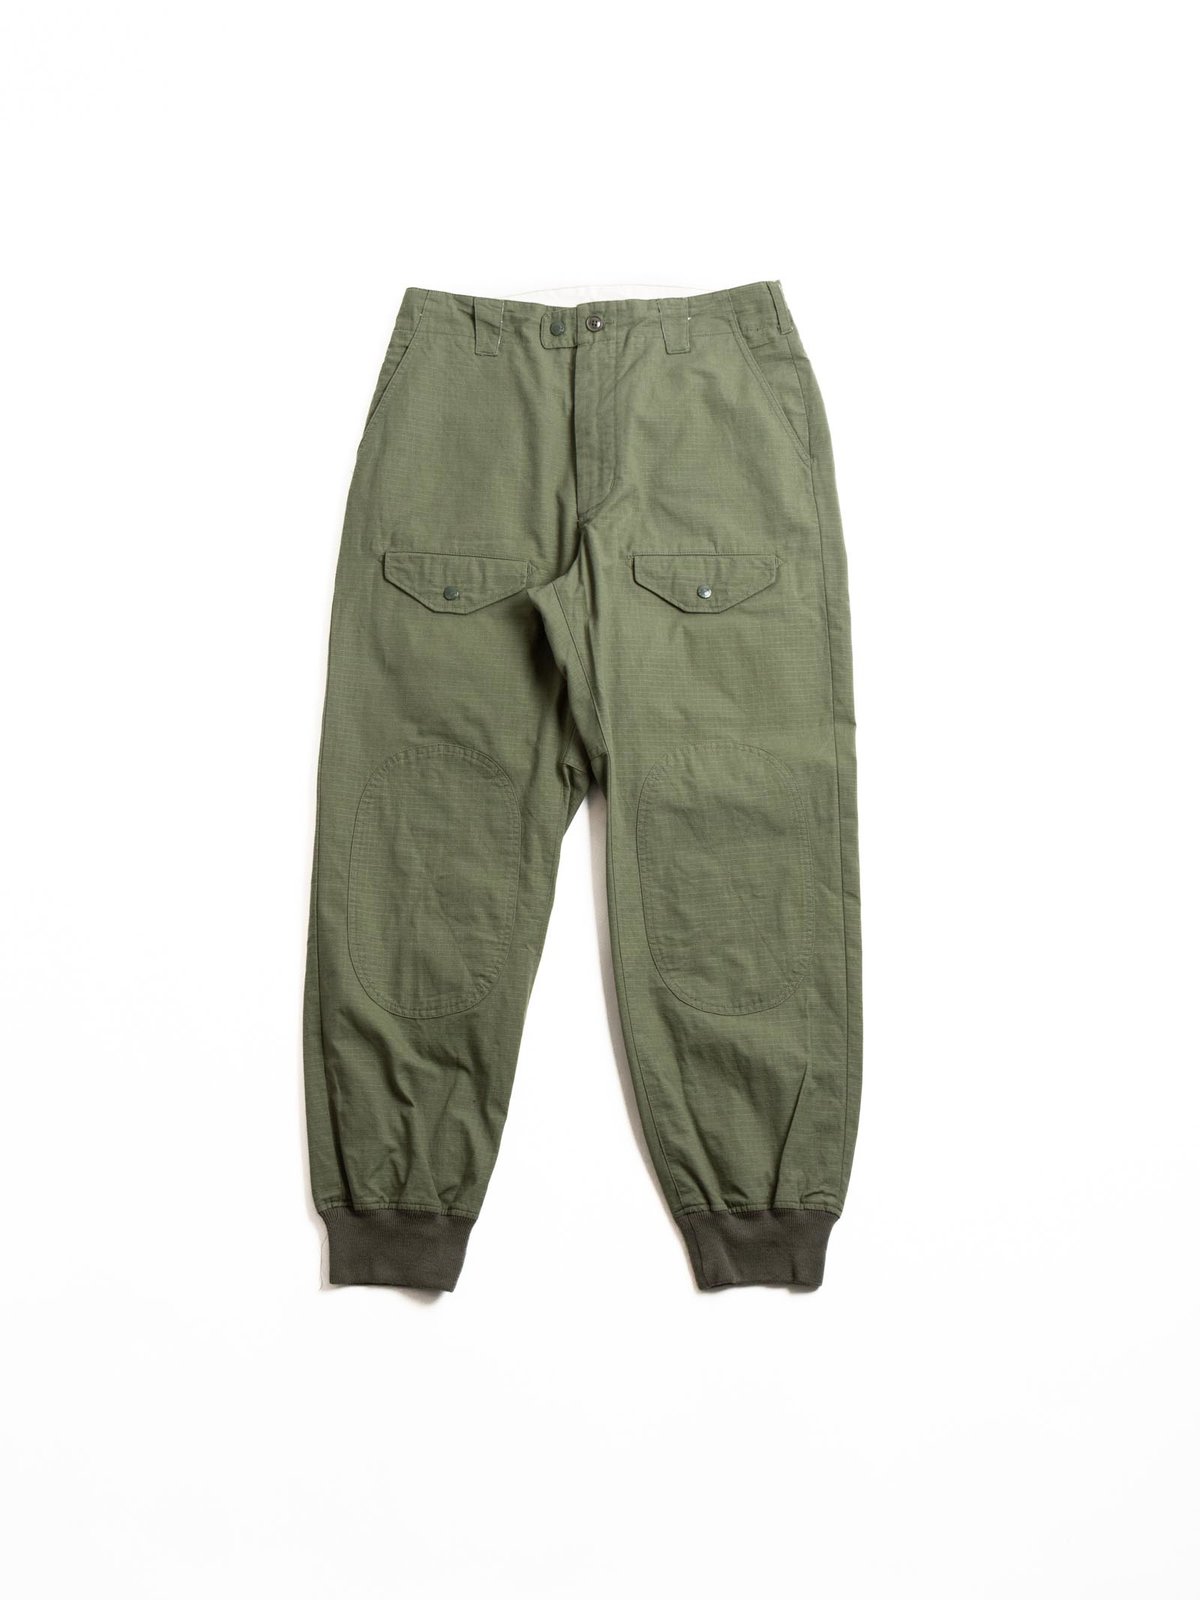 AIRBORNE PANT OLIVE COTTON RIPSTOP - Image 1